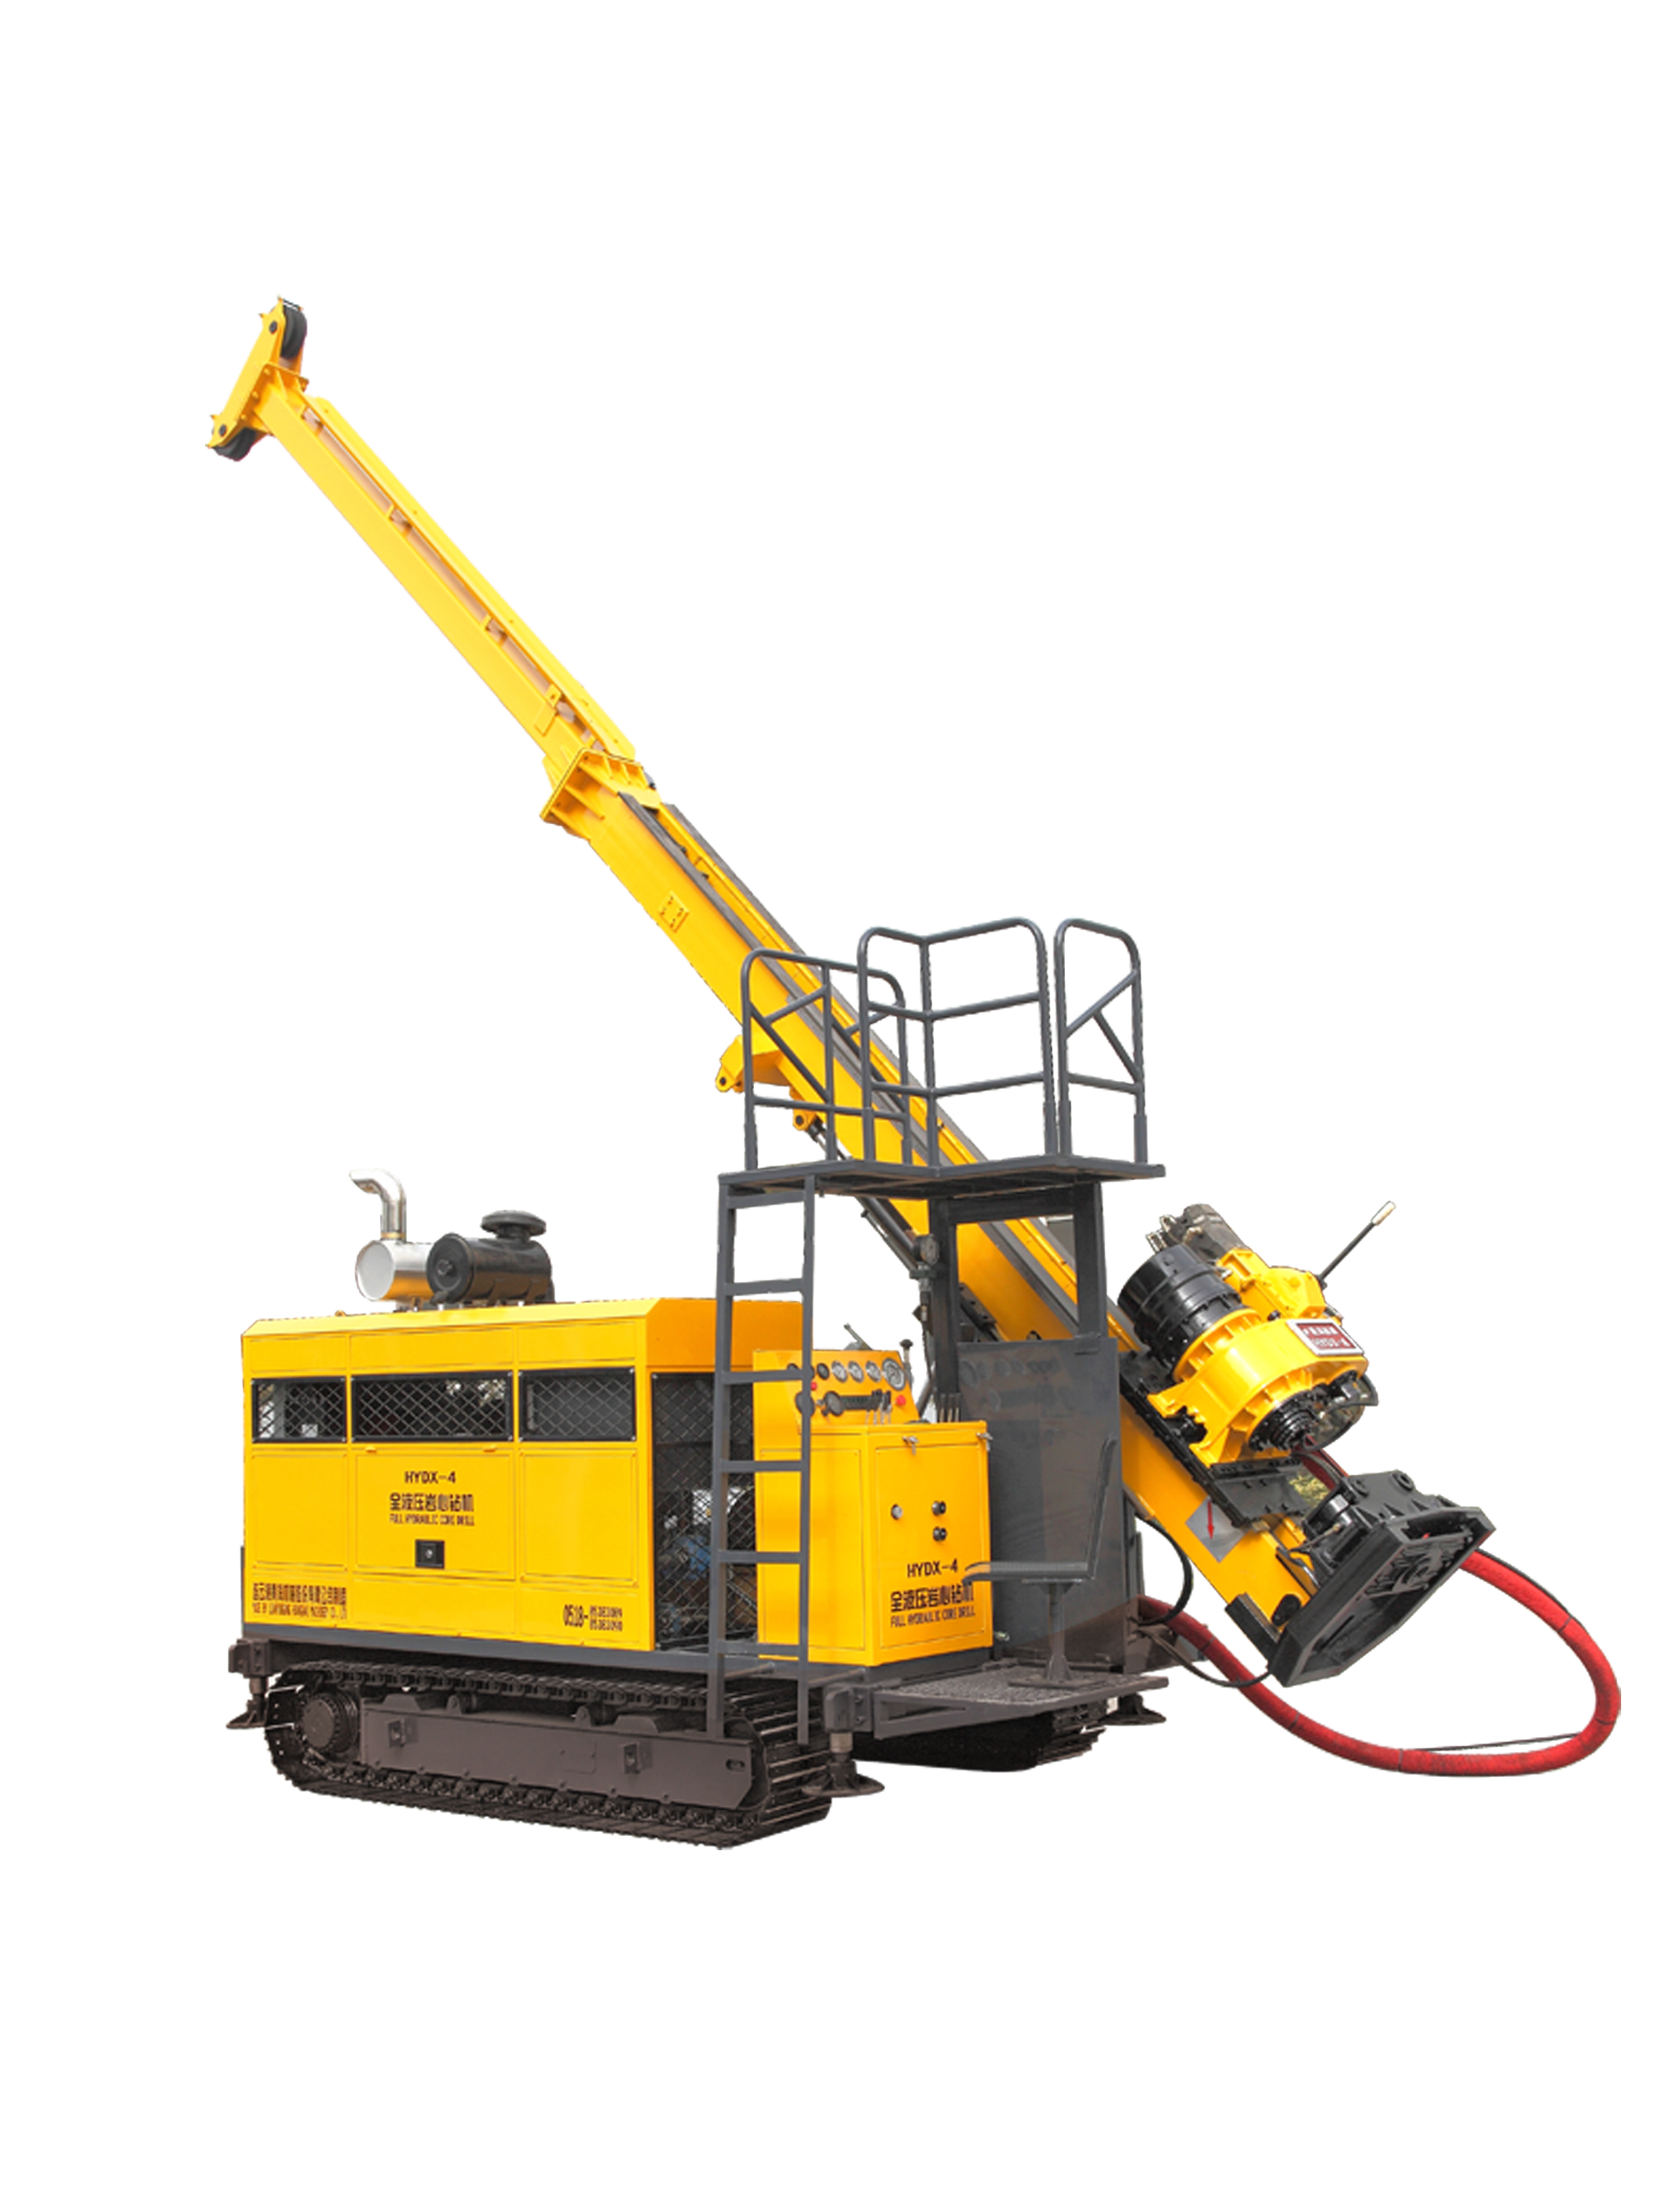 Core drilling rig